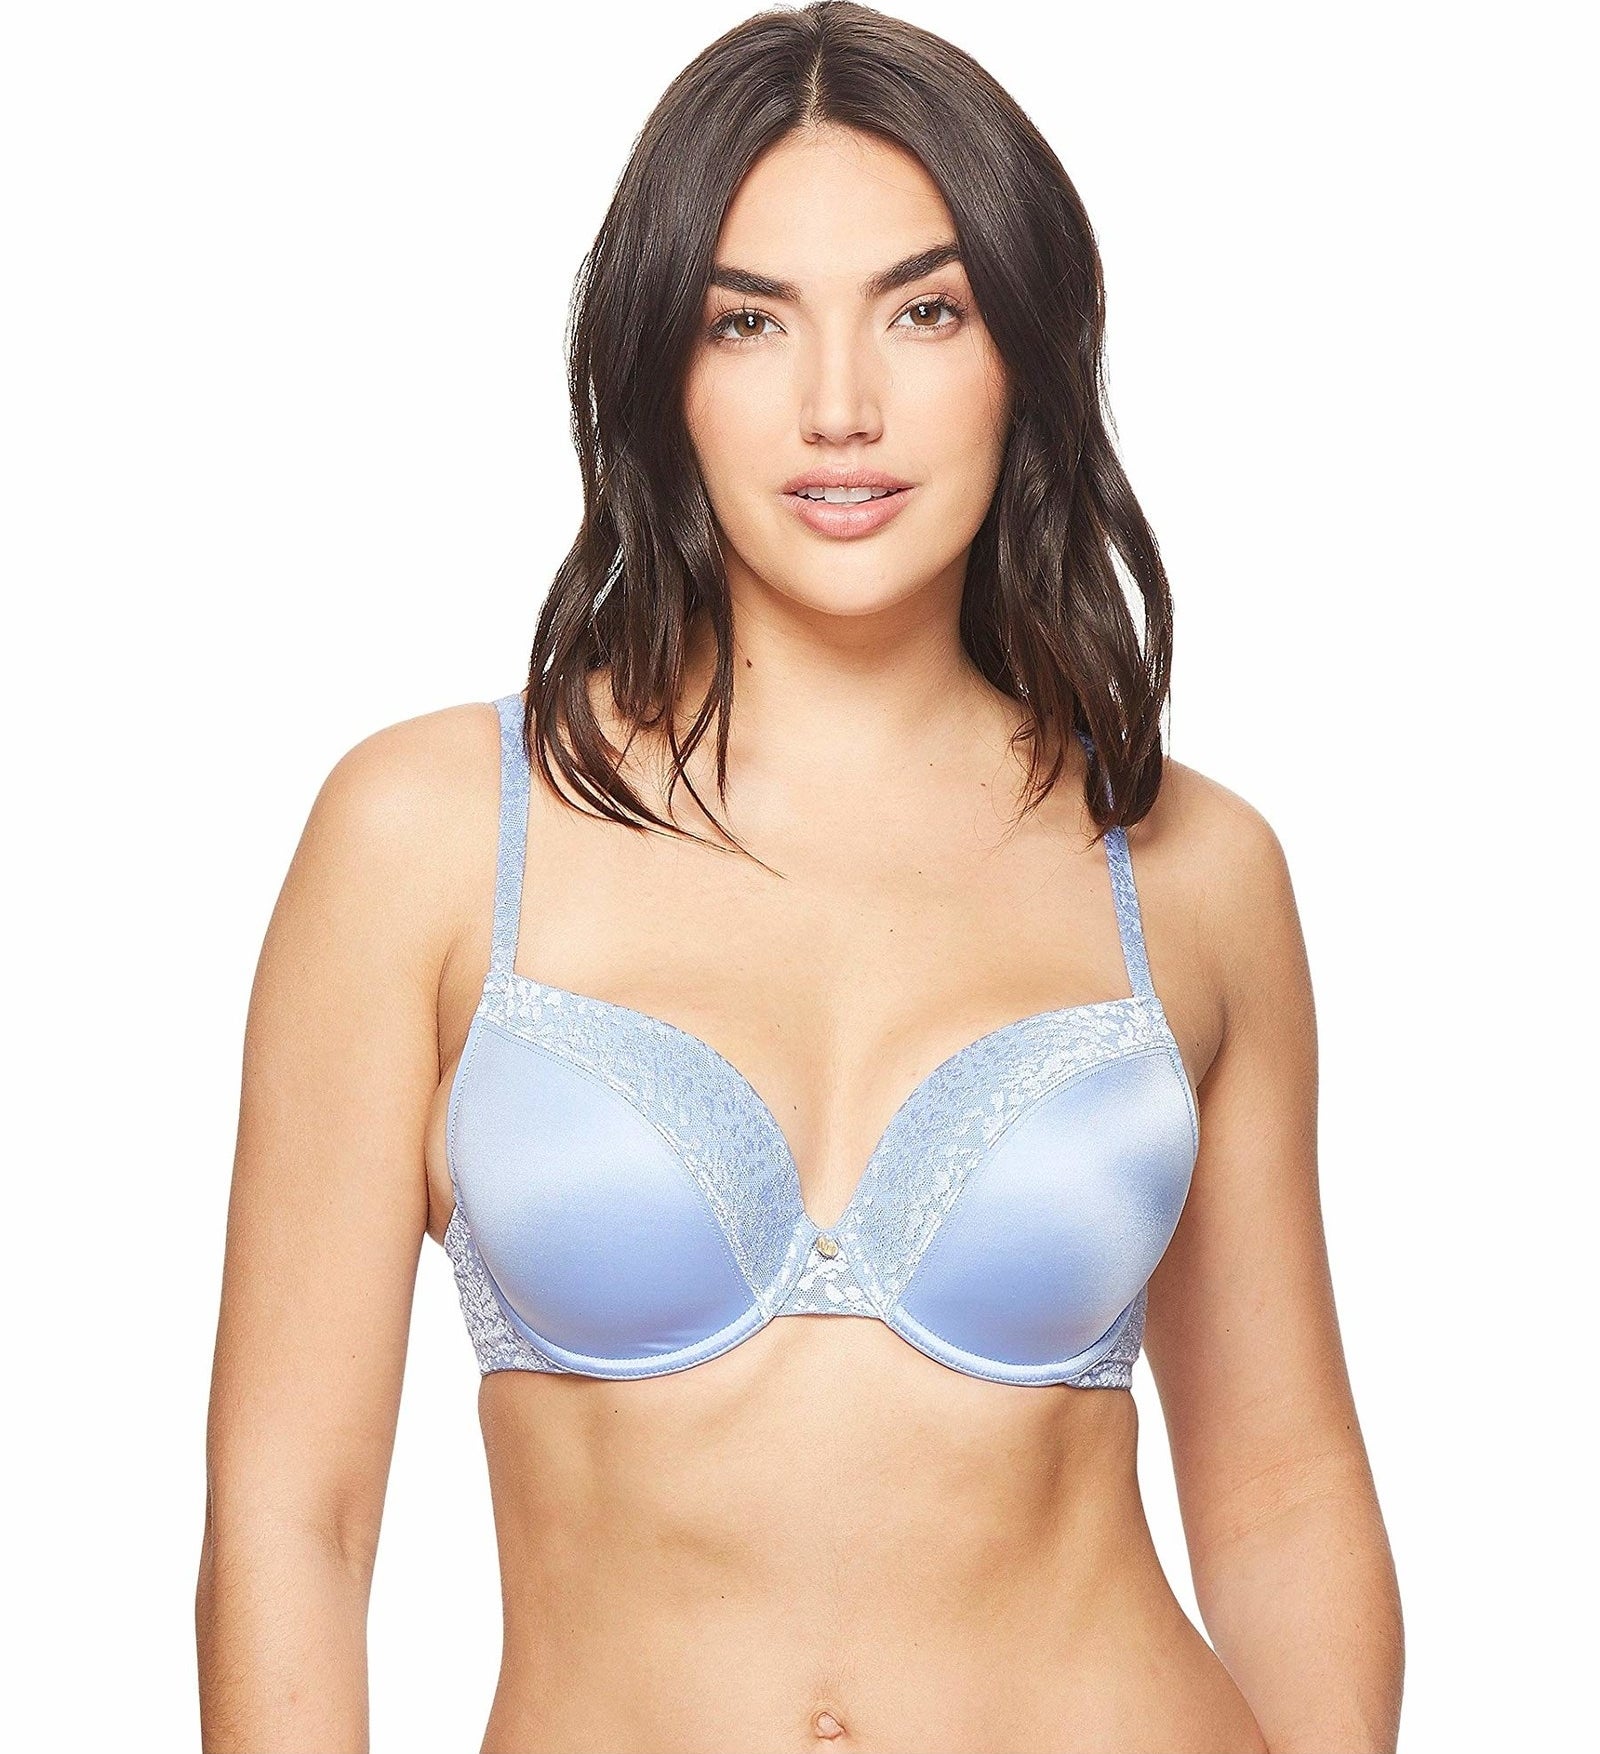 Why Unpadded Bras Are Underrated – Bra Doctor's Blog